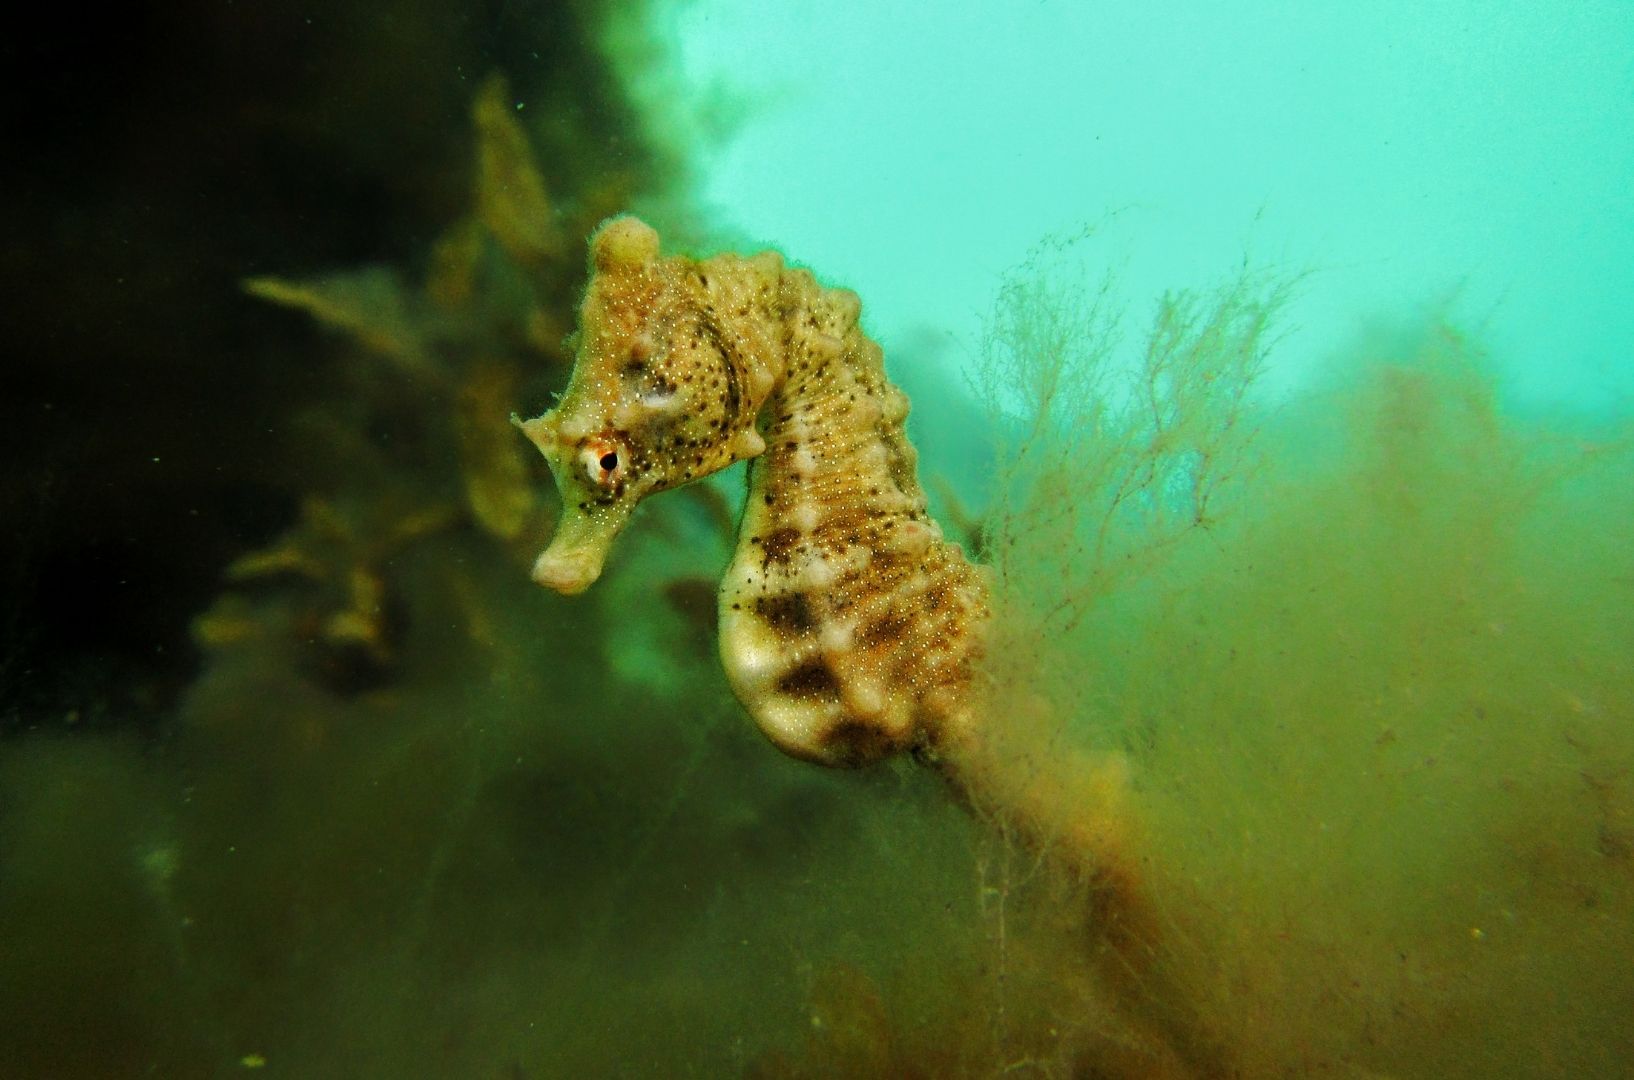 A scuba diving shot of a baby seahorse in the reeds